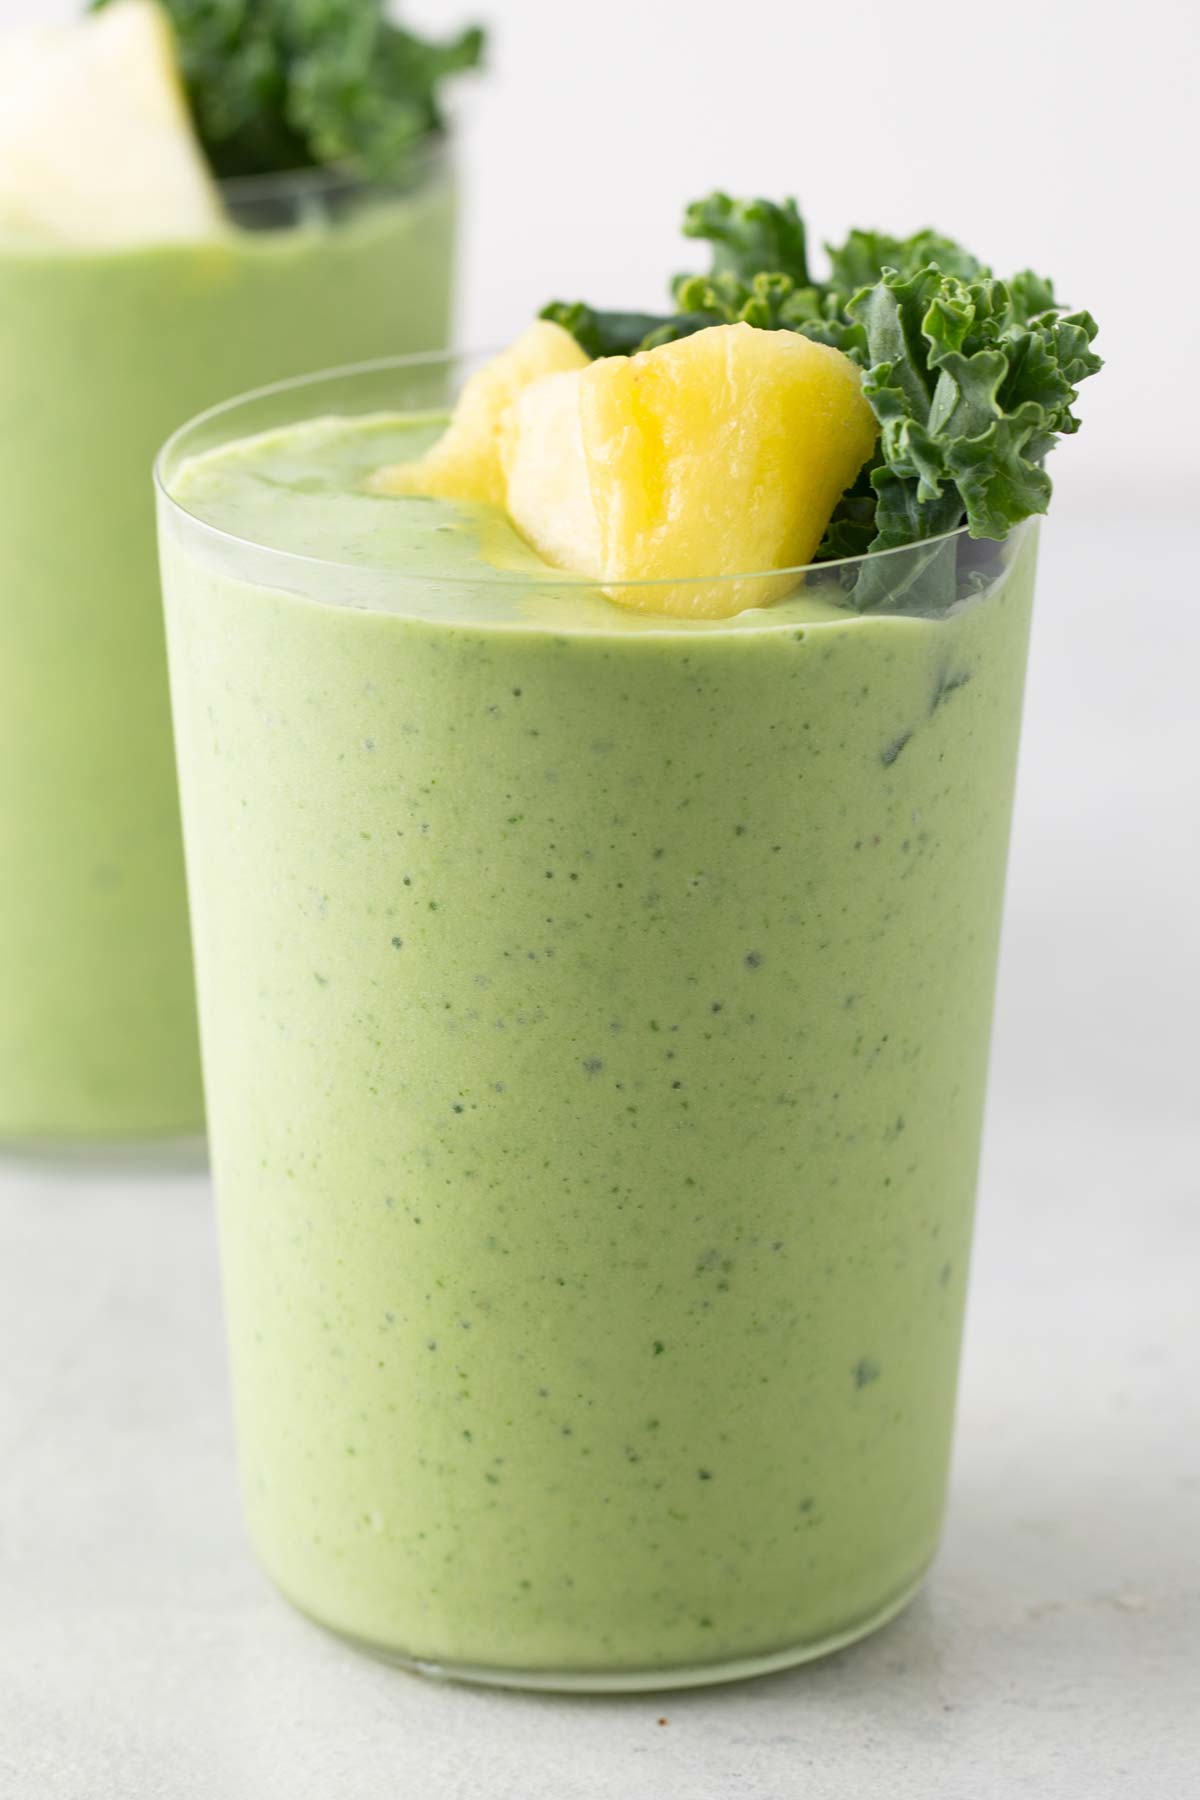 Kale pineapple smoothie in a cup.